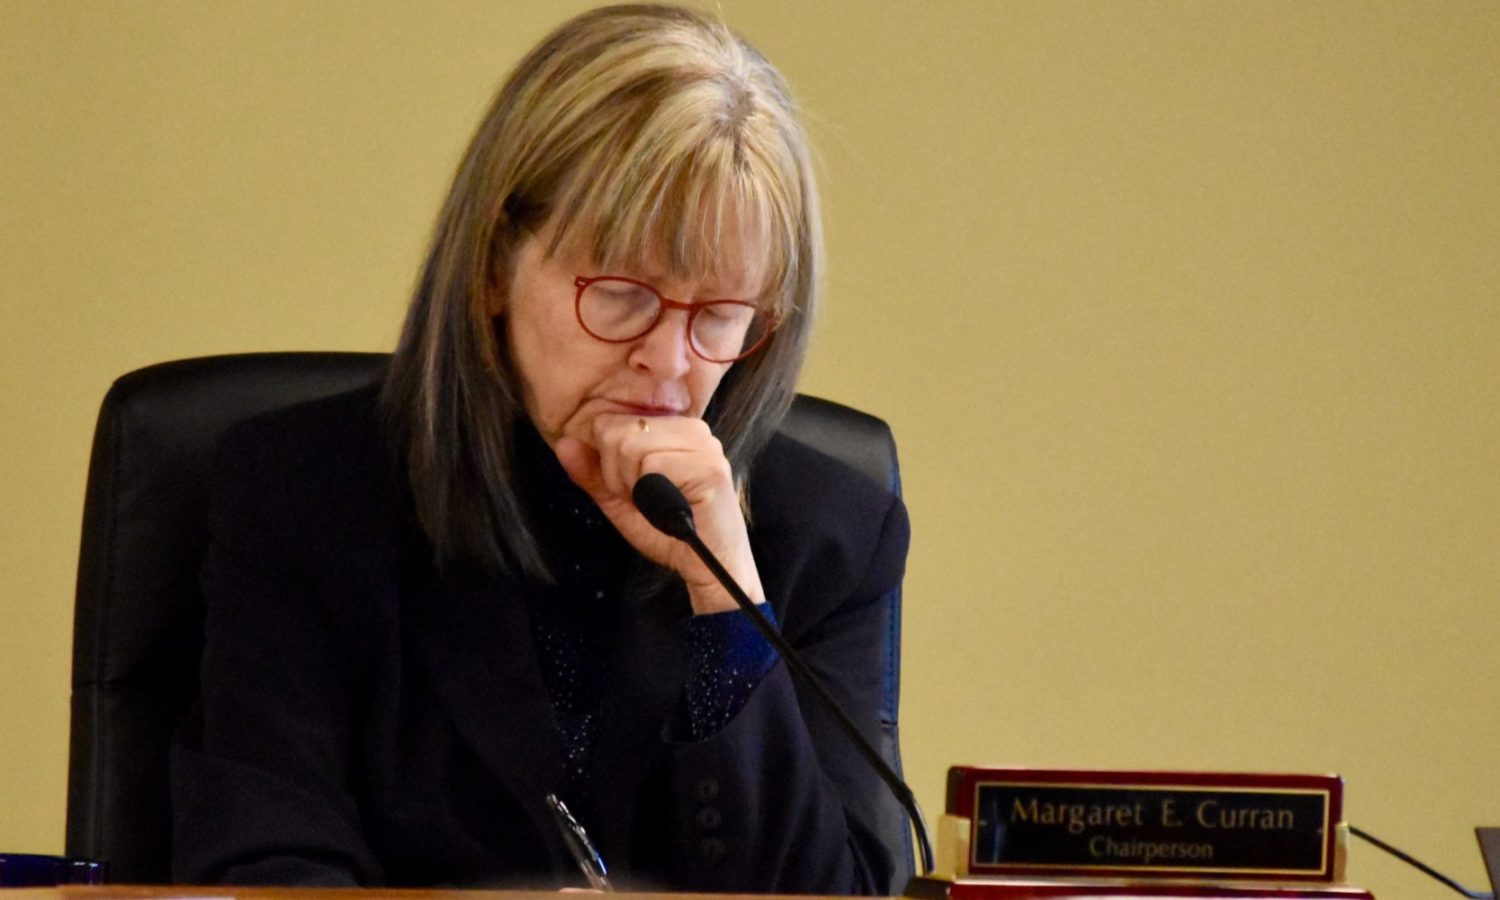 Margaret Curran out at PUC and EFSB, Laura Olton nominated to replace